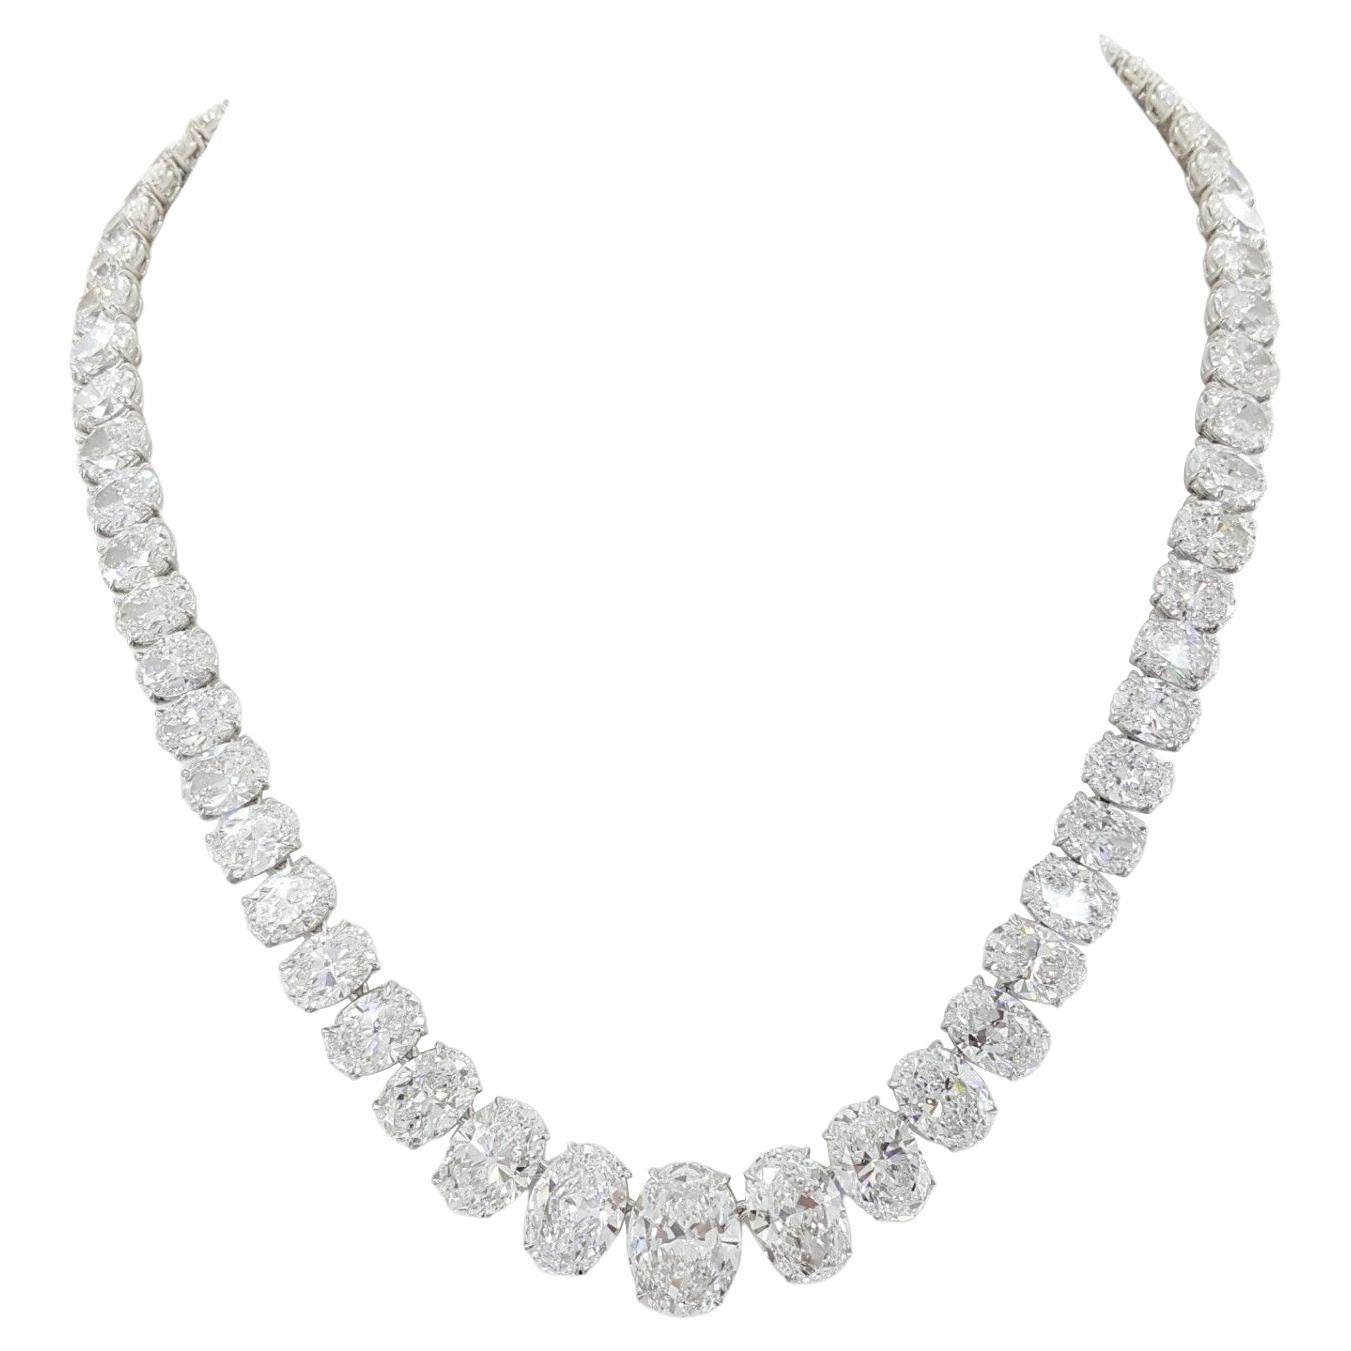 85 Carat Oval Brilliant Cut Diamond Riviera Tennis Necklace

Adorn yourself with sheer opulence and sophistication with our mesmerizing 85 ct Oval Brilliant Cut Diamond Riviera Tennis Necklace. This exquisite piece is not just a necklace—it's a